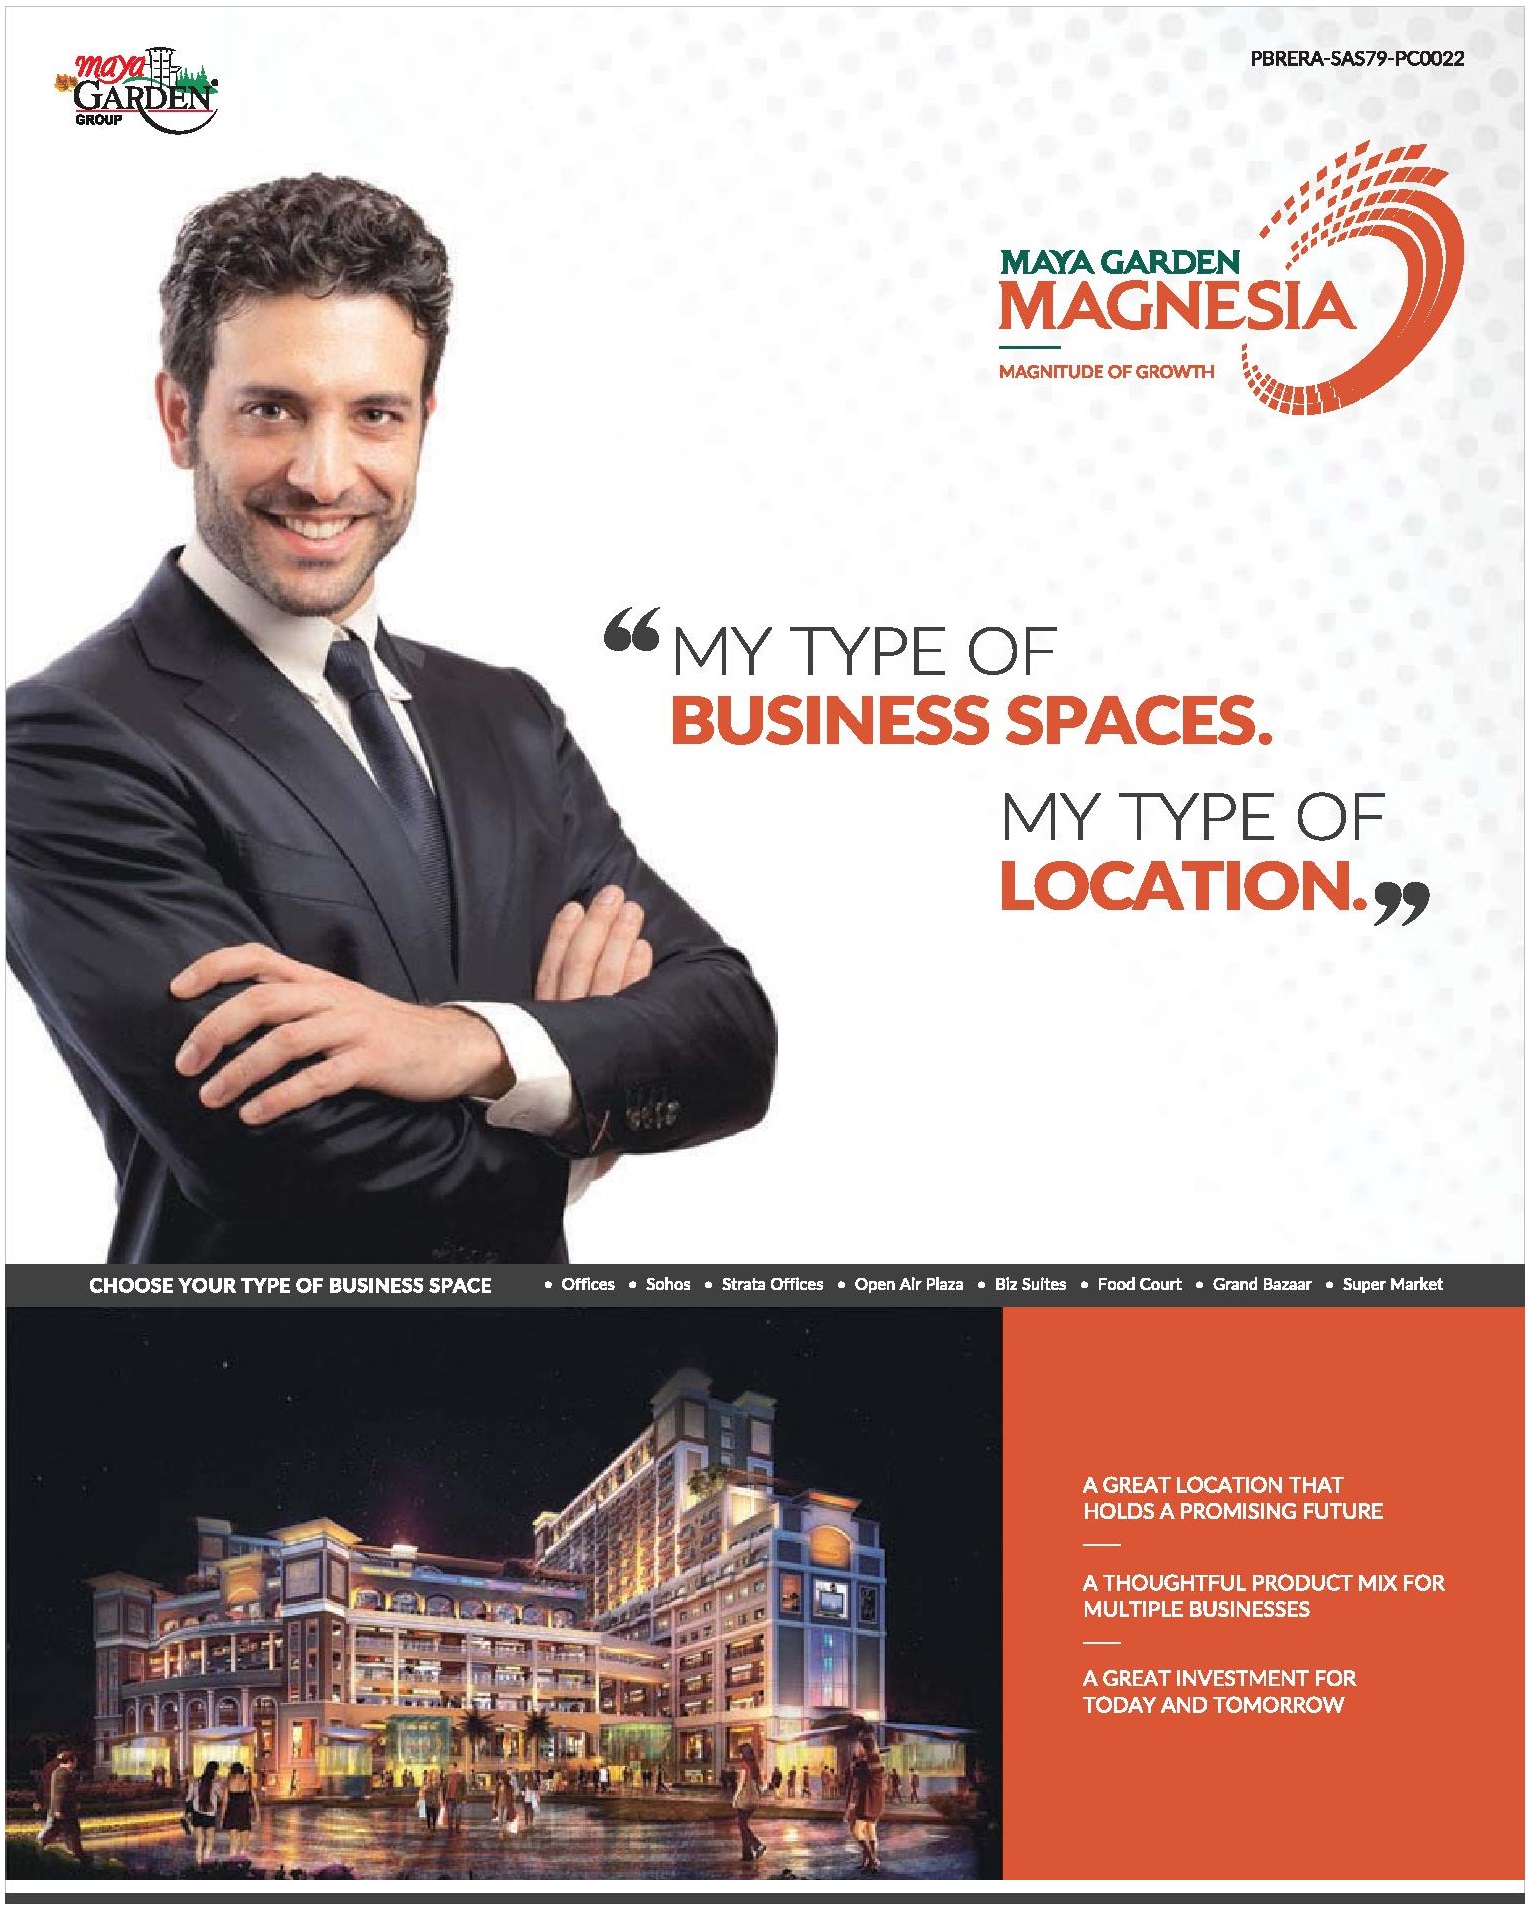 Book your type of business space at Maya Garden Magnesia in Chandigarh